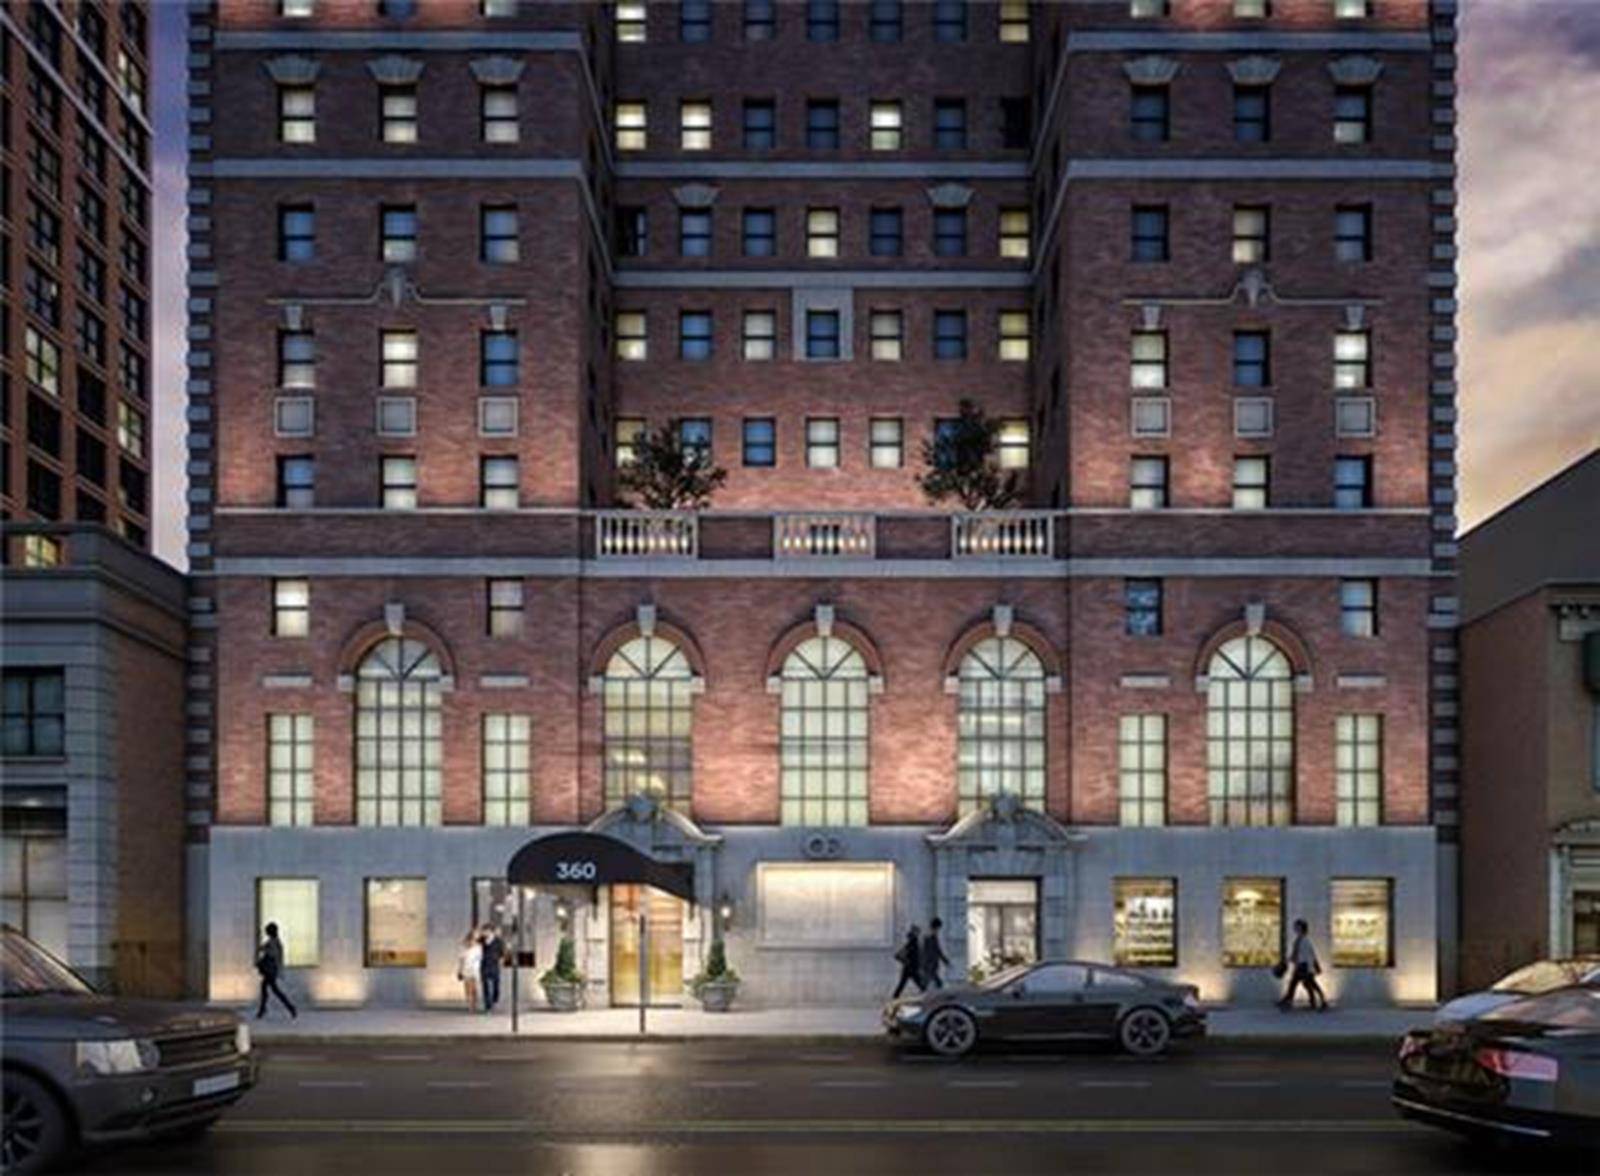 Located in Midtown West at the southern border of Hell's Kitchen, great sized apartments within walking distance to Herald Square, Times Square and many other central hubs in Manhattan.